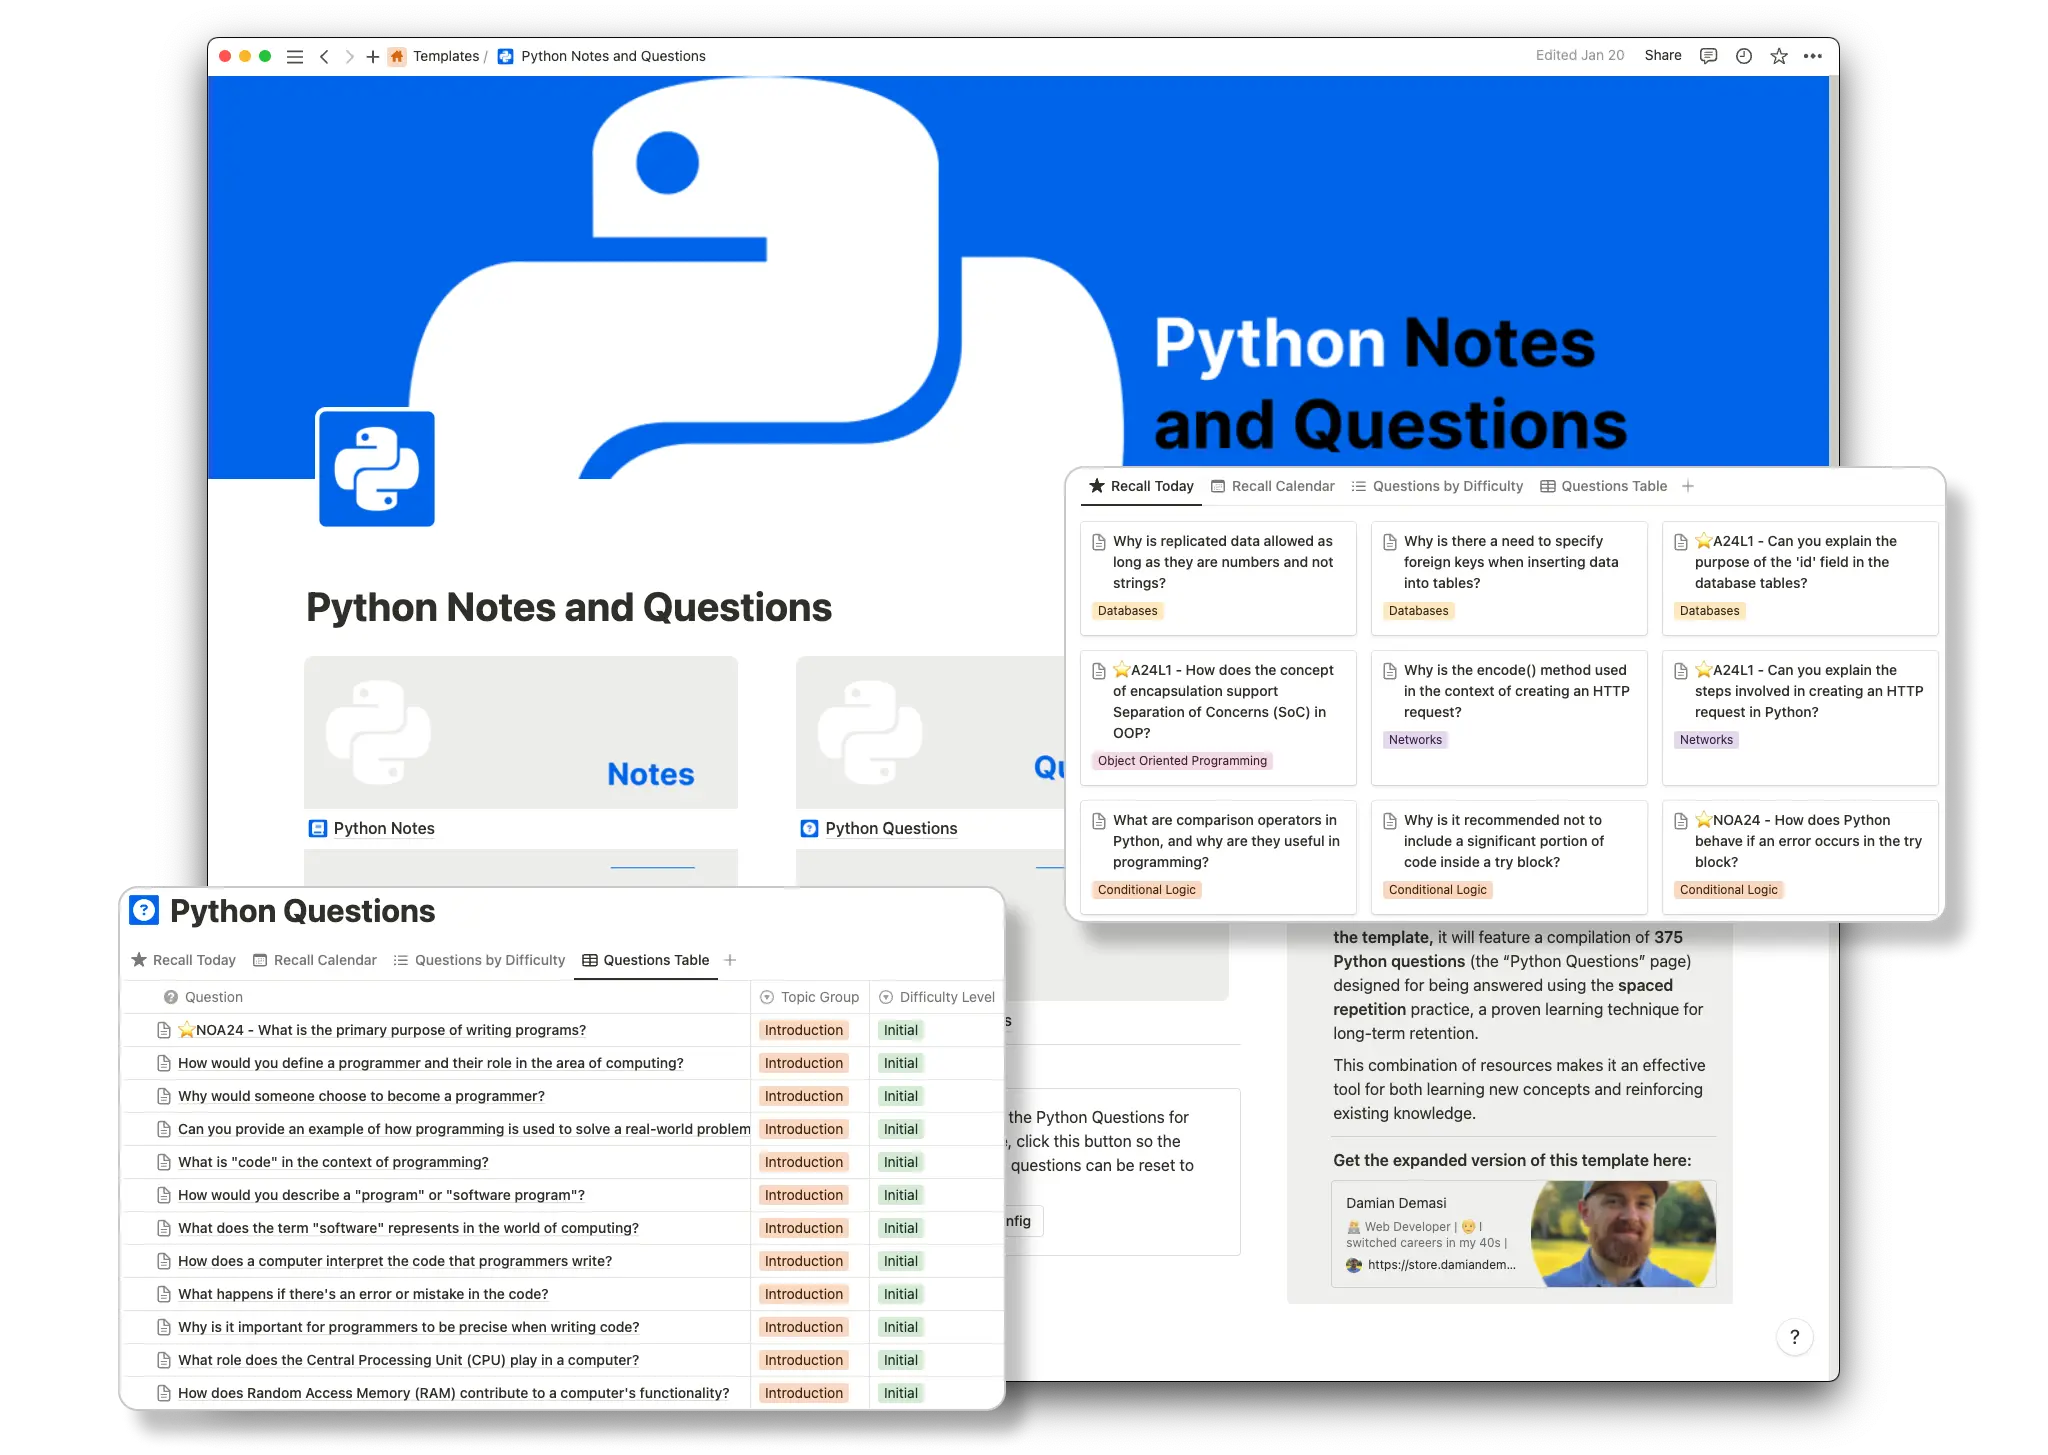 Python Notes and Questions Overview